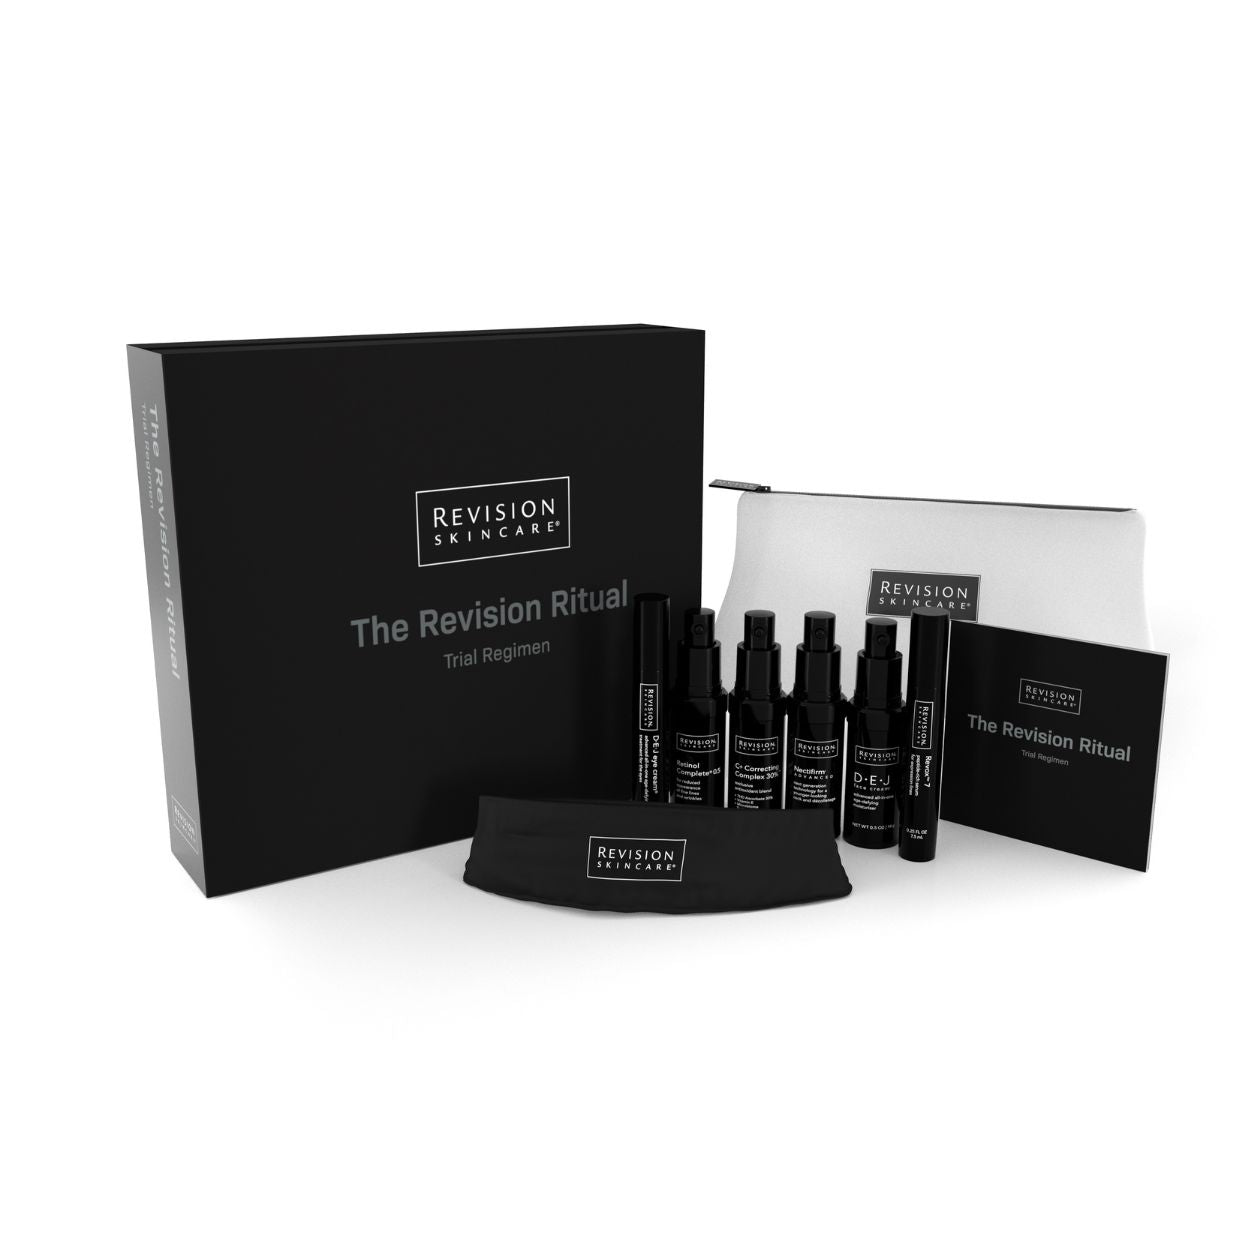 The Revision Ritual Limited Edition Trial Regimen